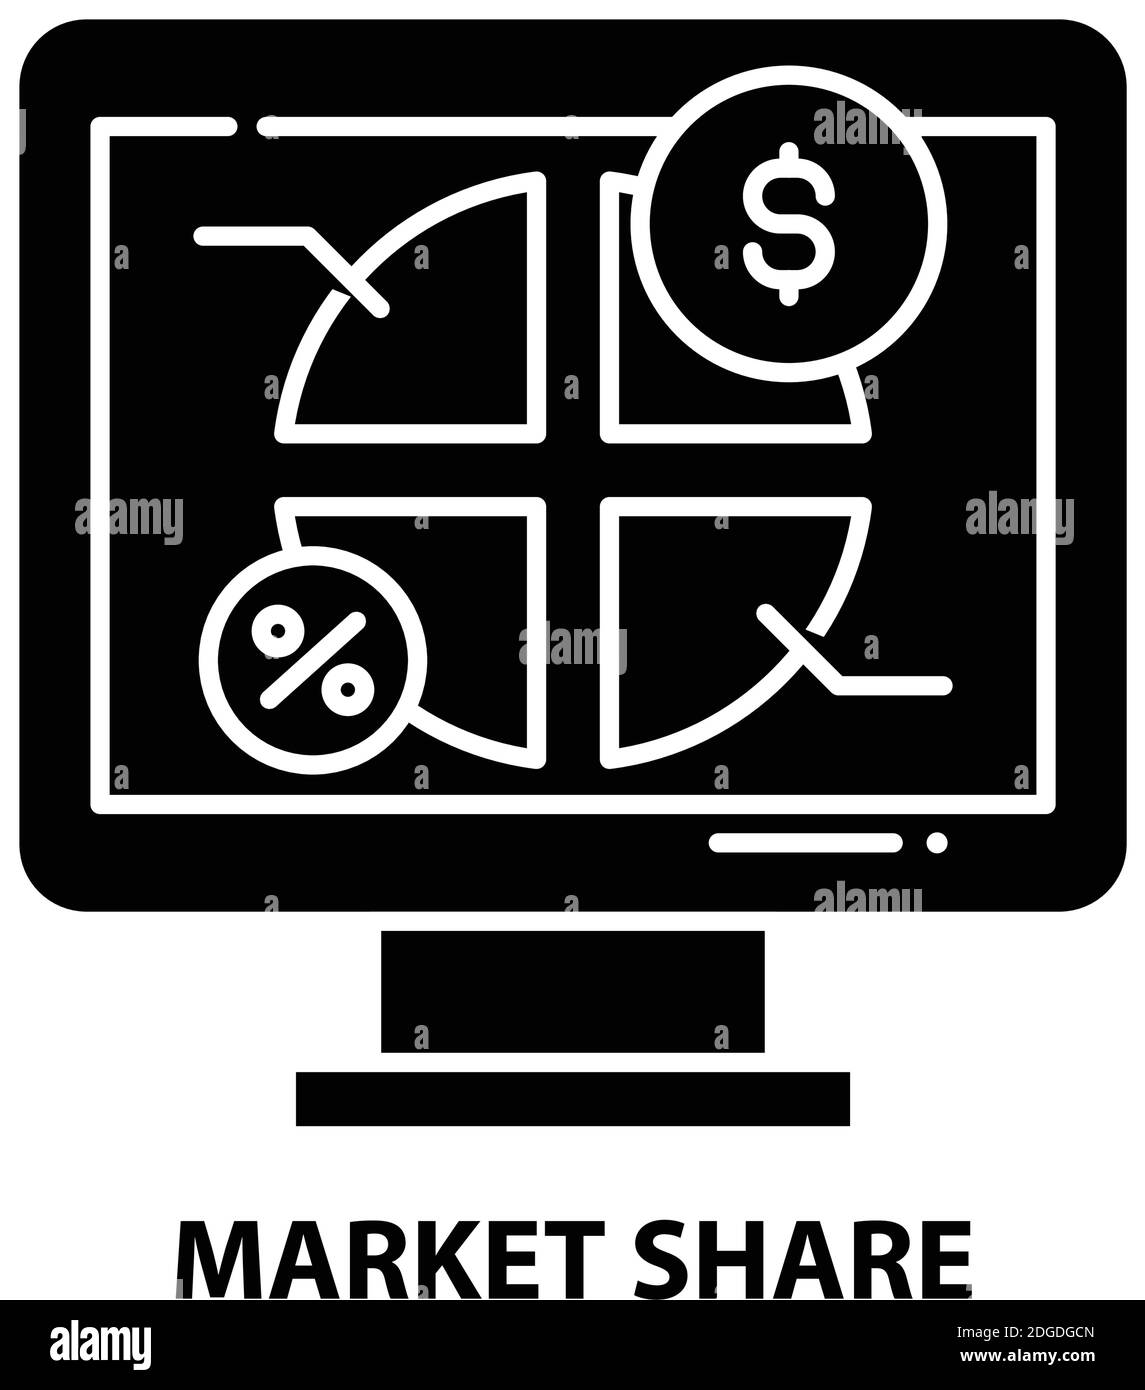 market share icon, black vector sign with editable strokes, concept illustration Stock Vector